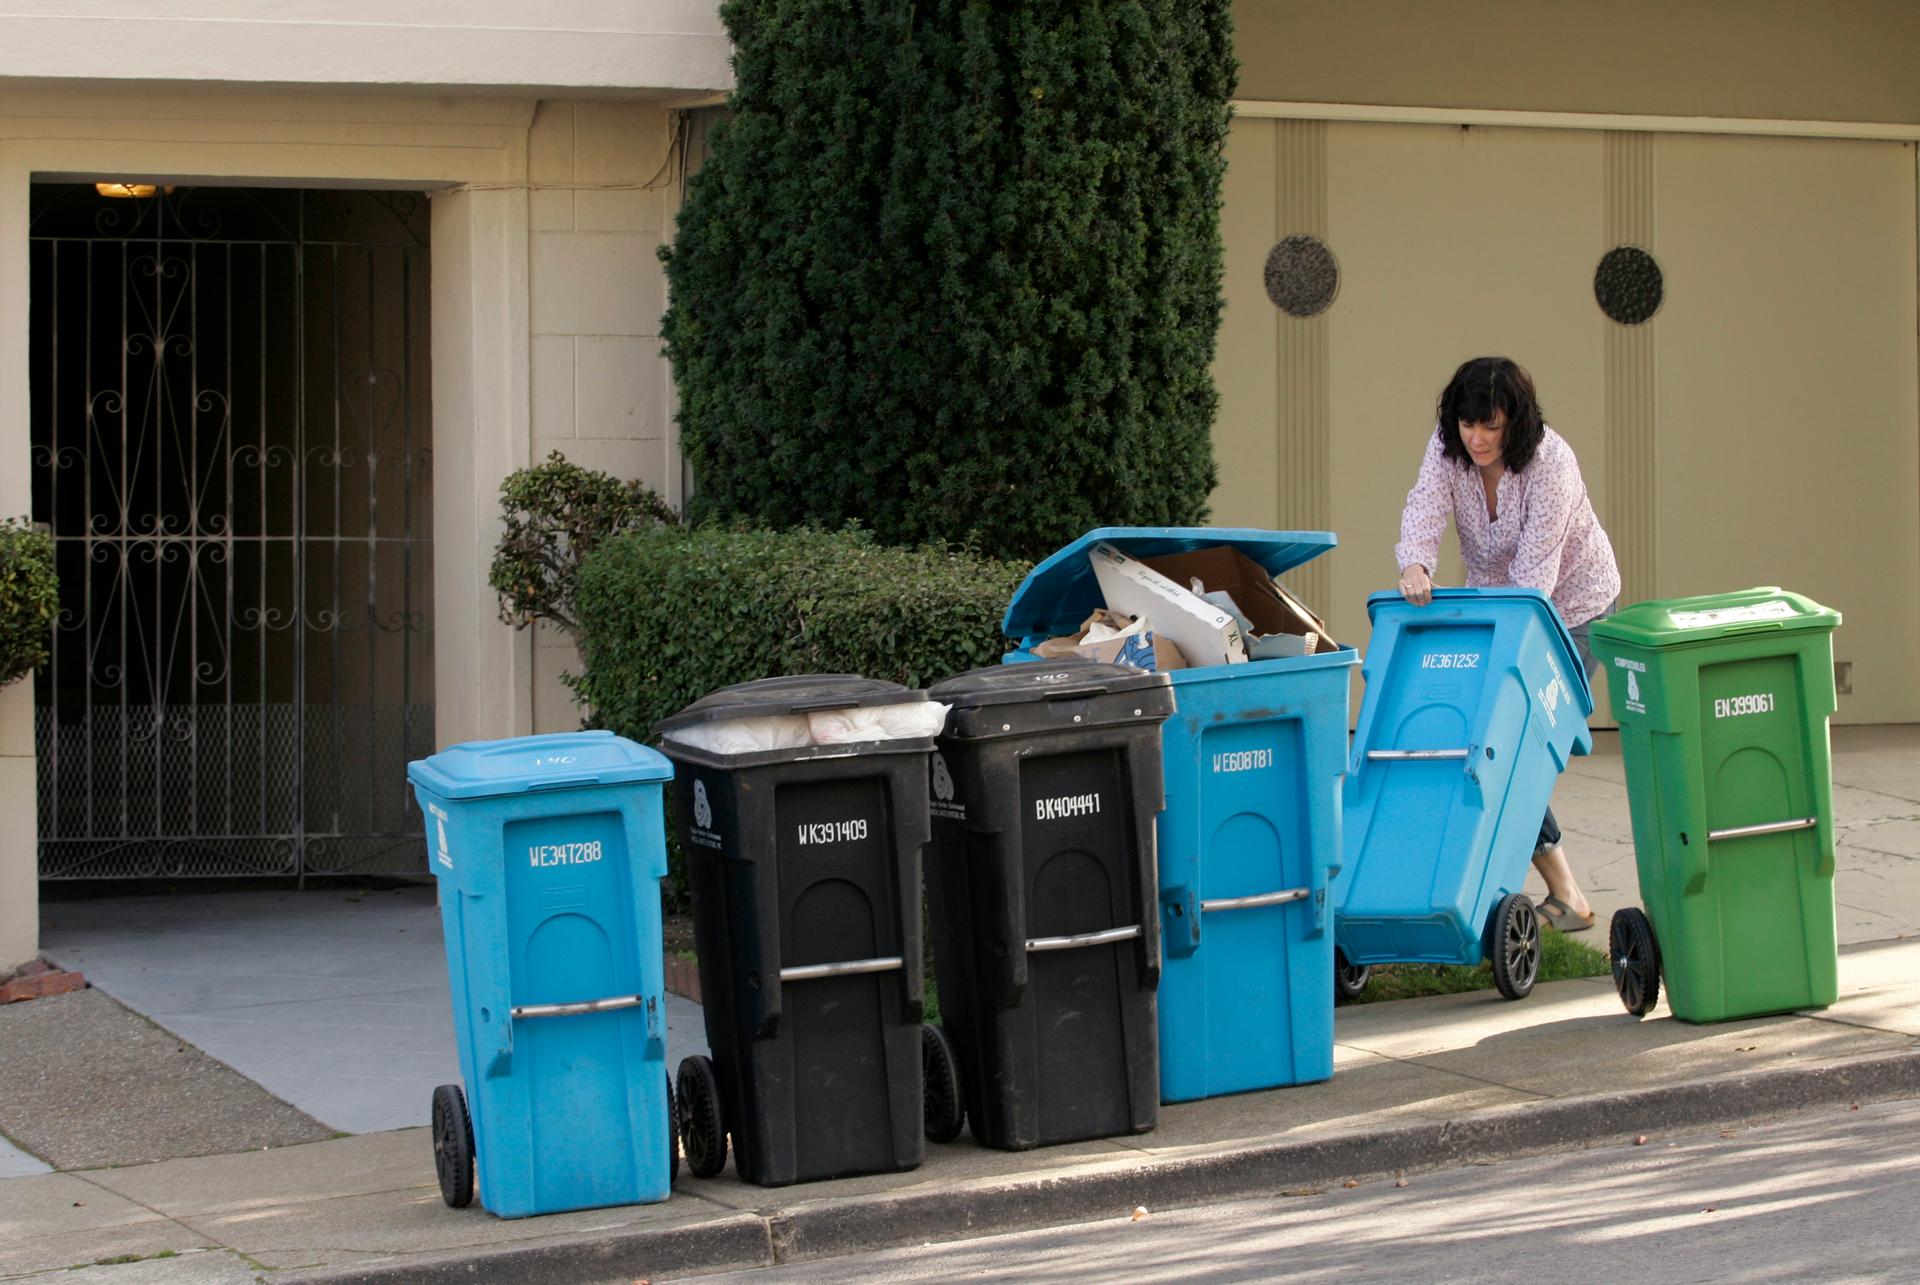 A woman puts different large garbage and recycling containers on a sidewalk.